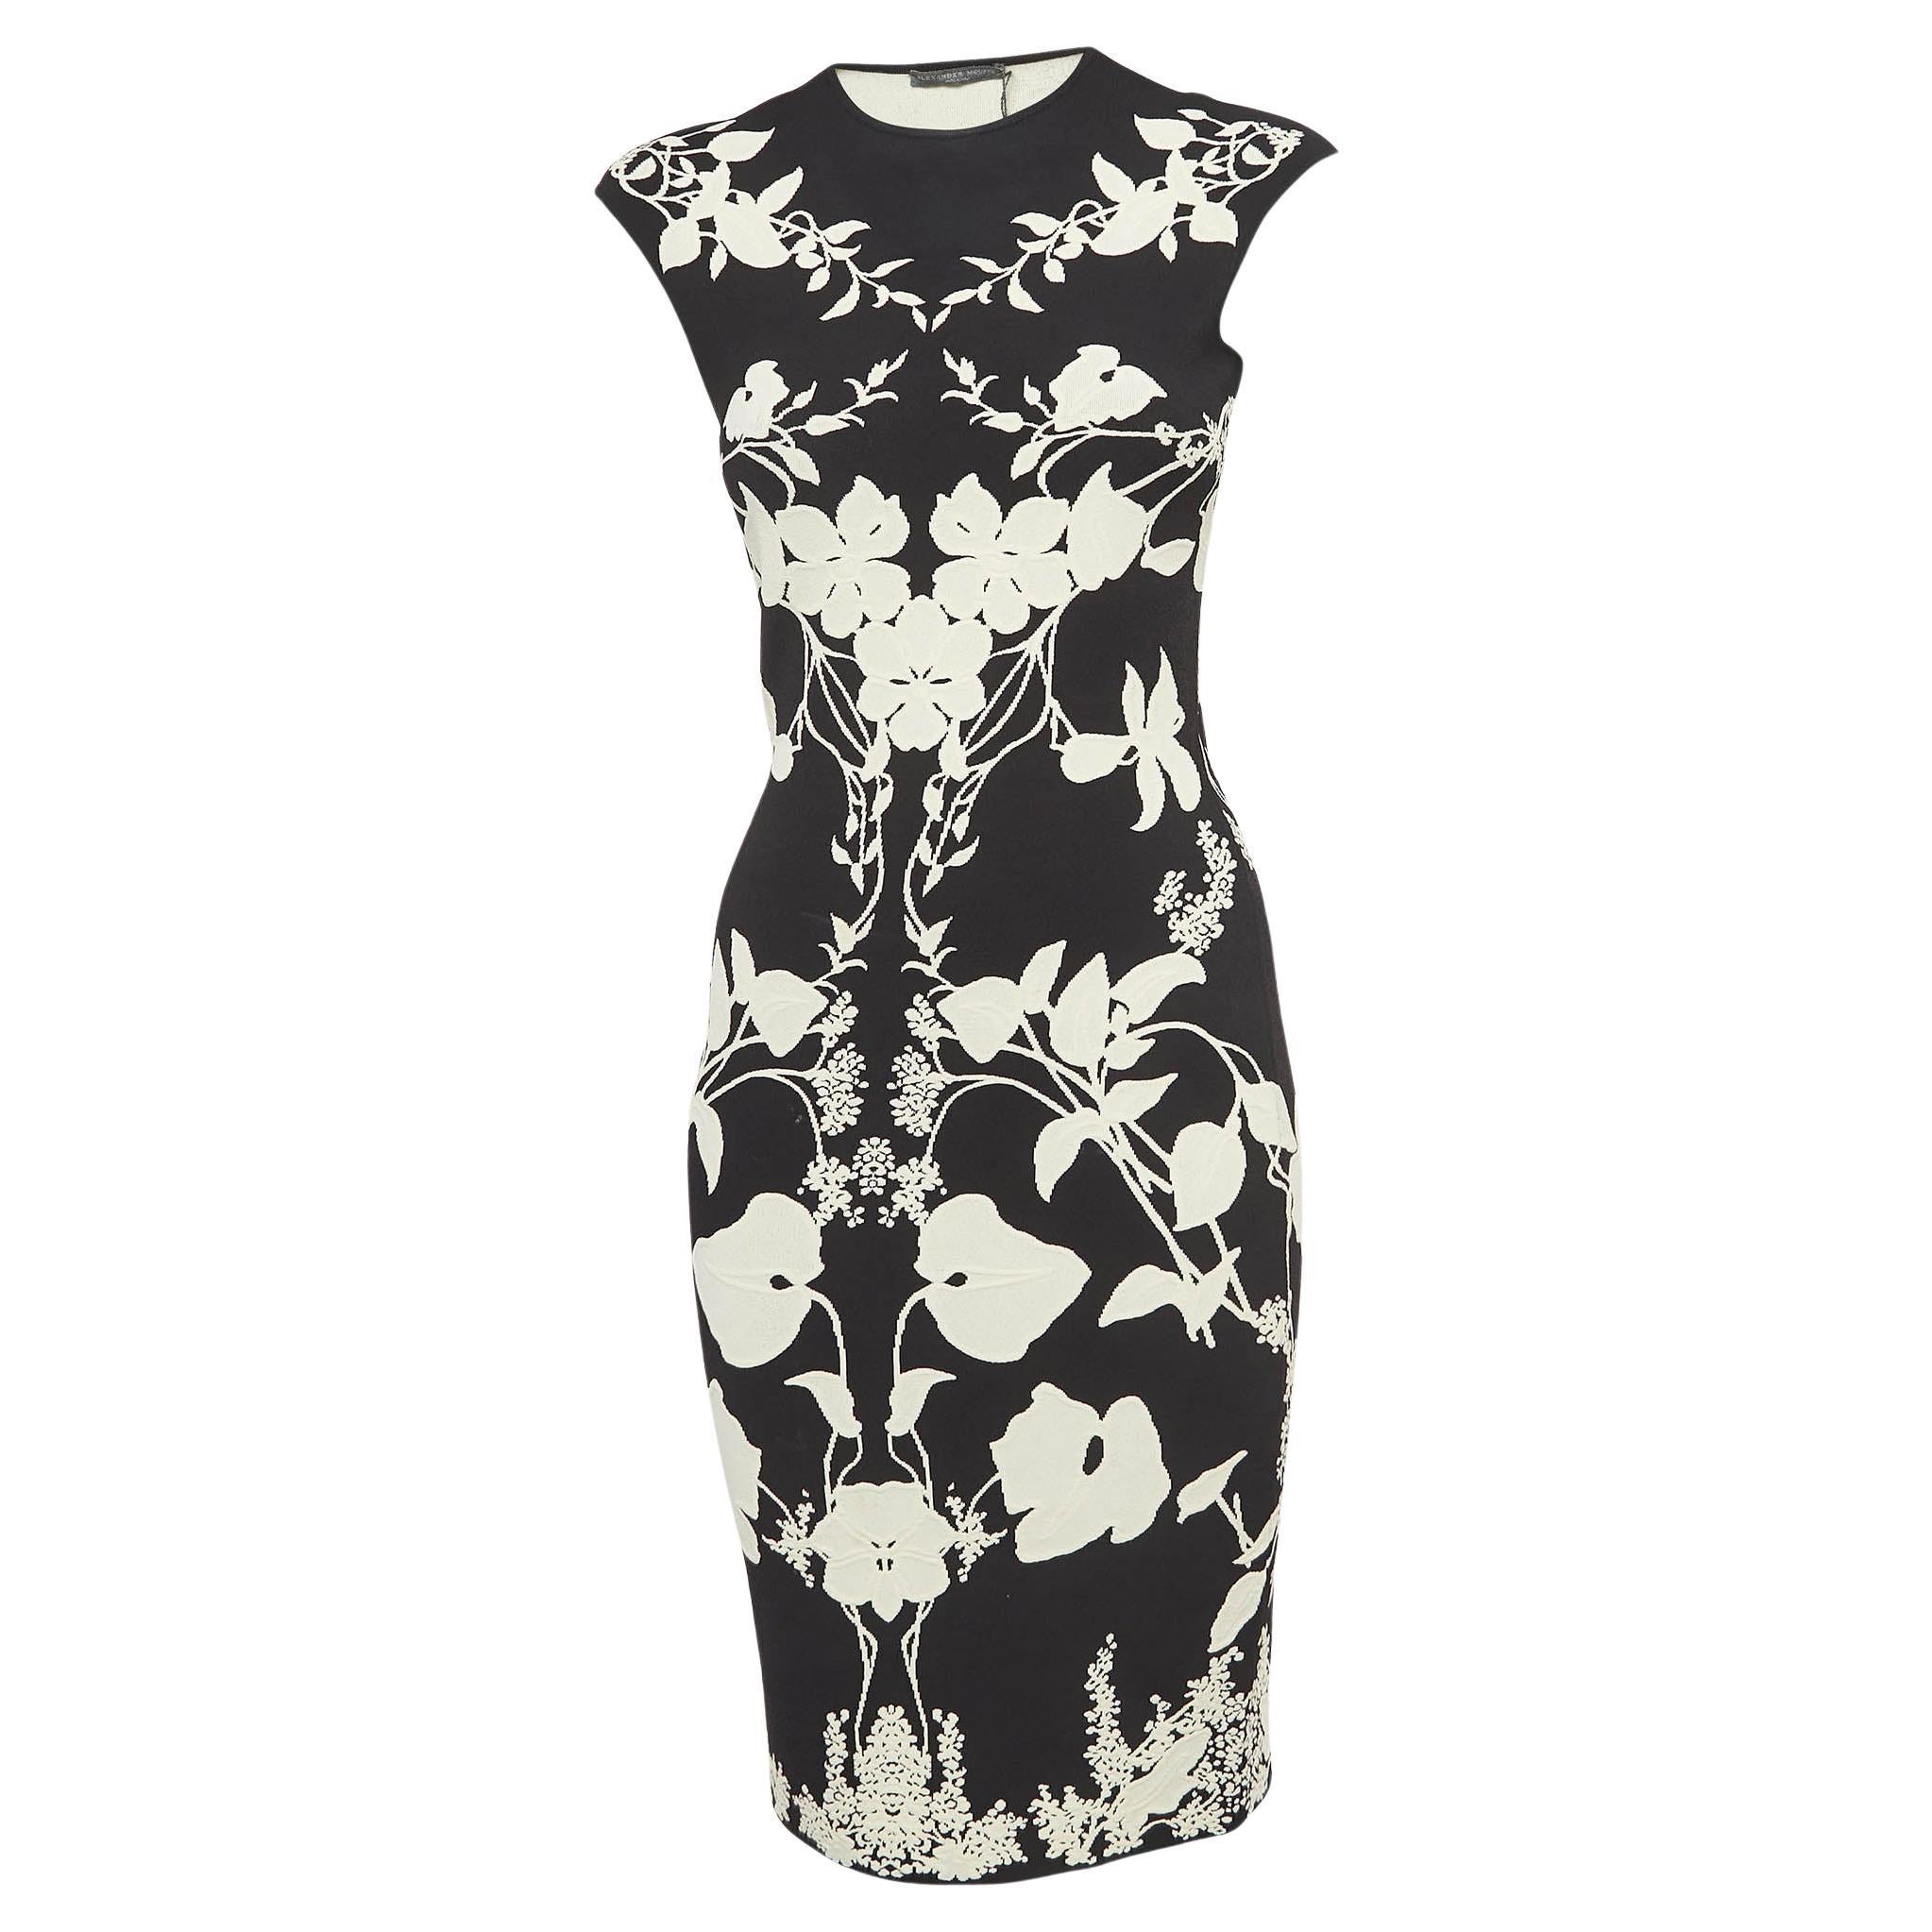 Alexander McQueen Black/White Floral Patterned Knit Bodycon Dress S